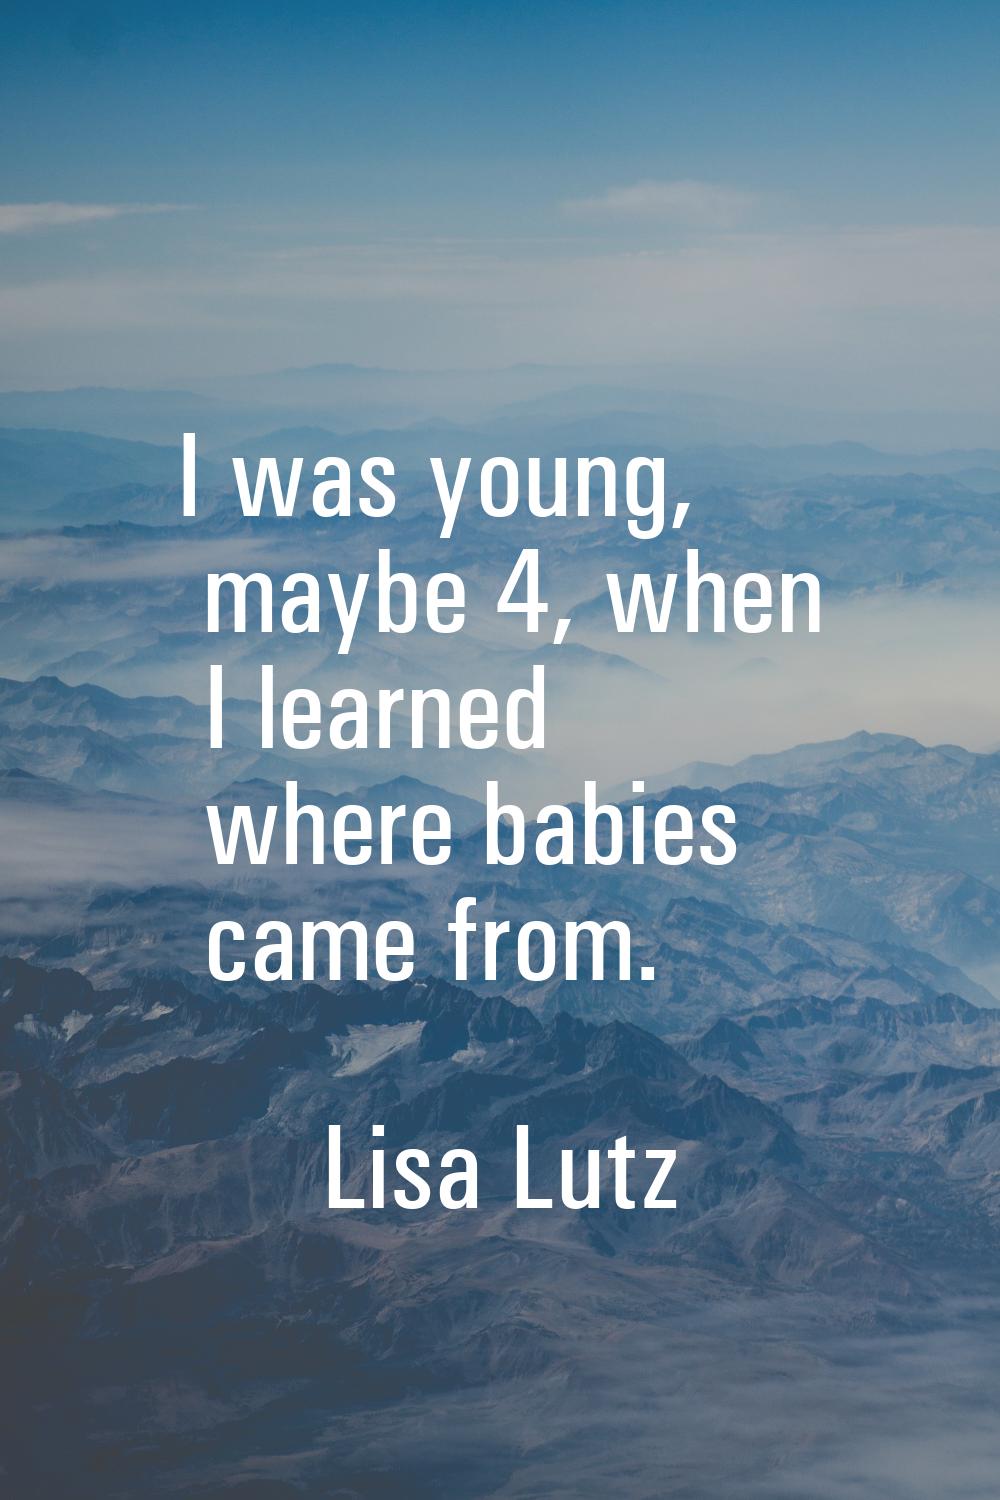 I was young, maybe 4, when I learned where babies came from.